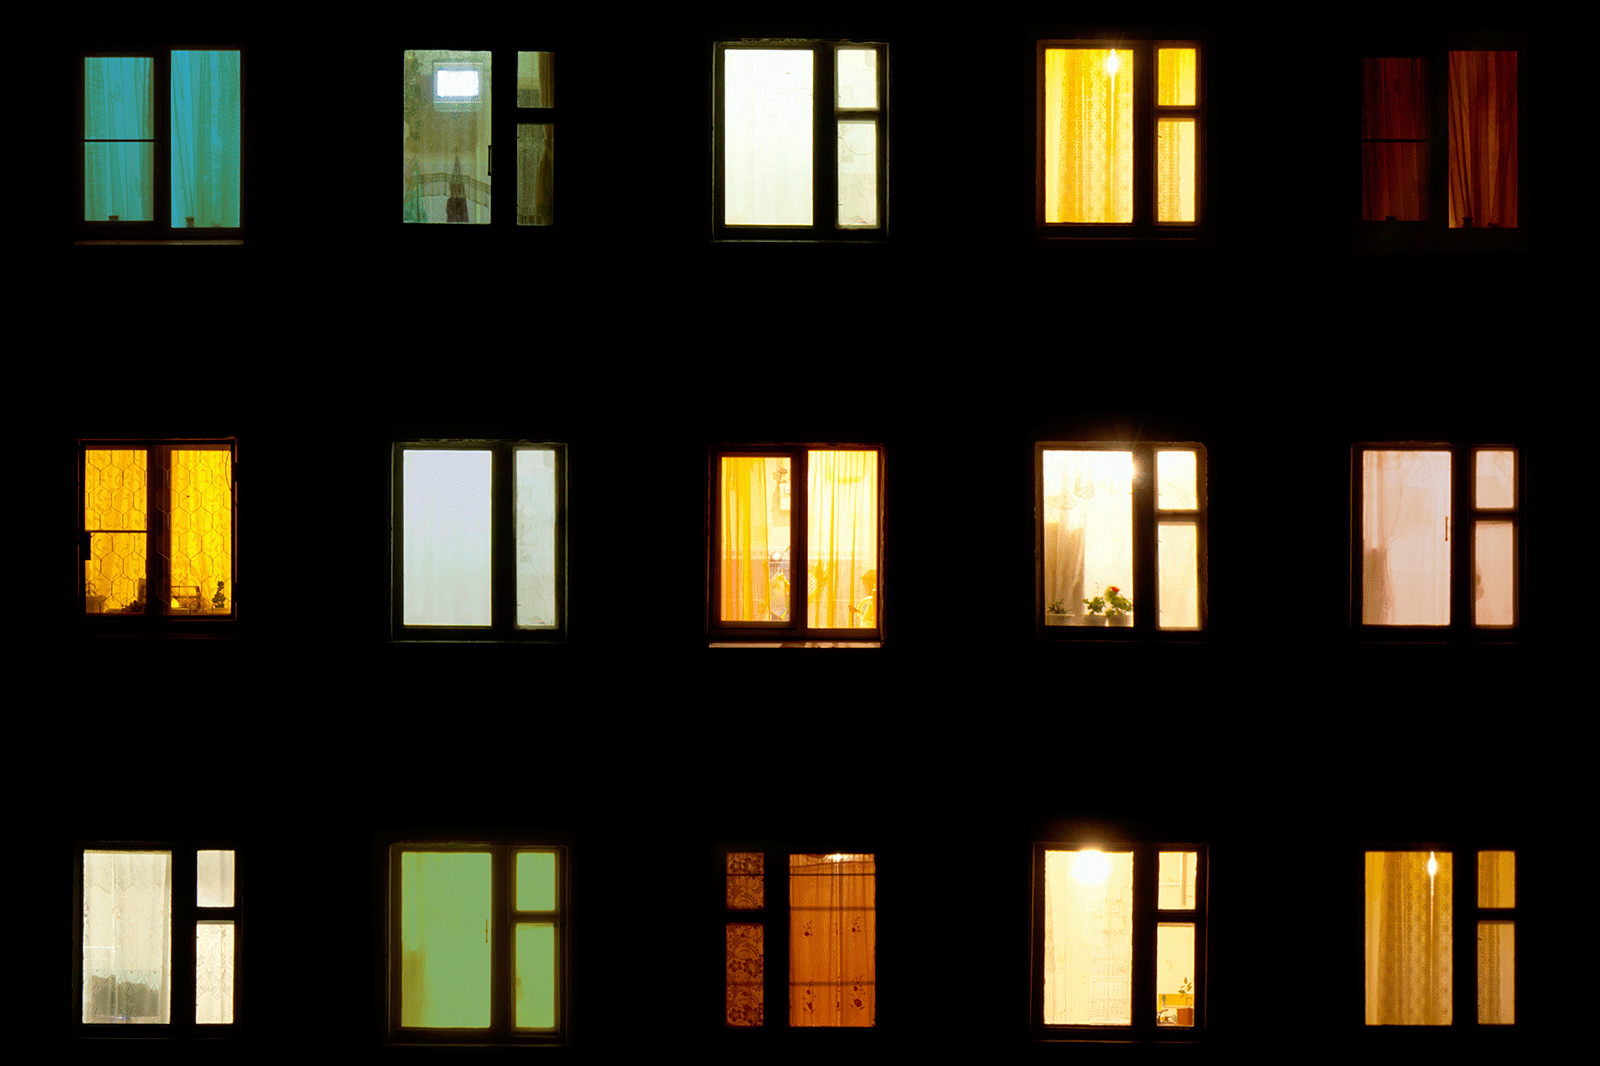 Apartment windows' lights going on and off.